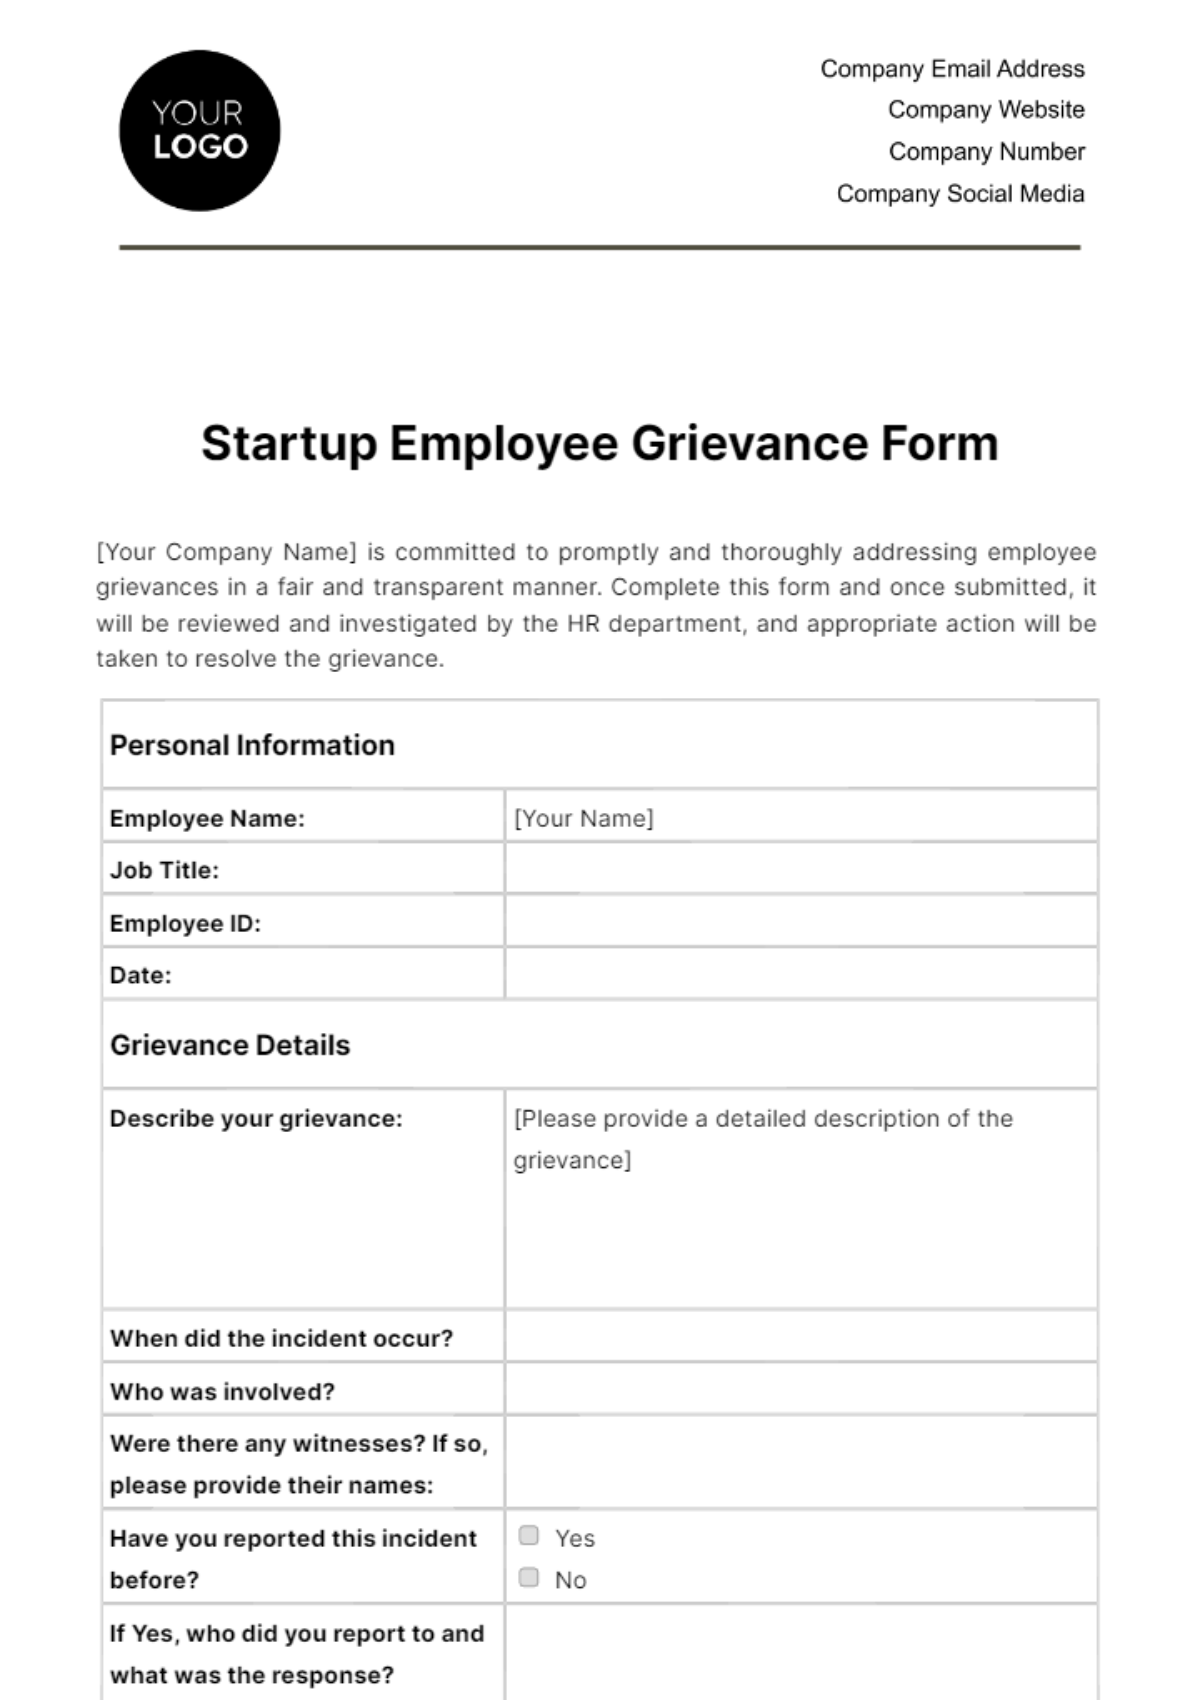 Free Startup Employee Grievance Form Template